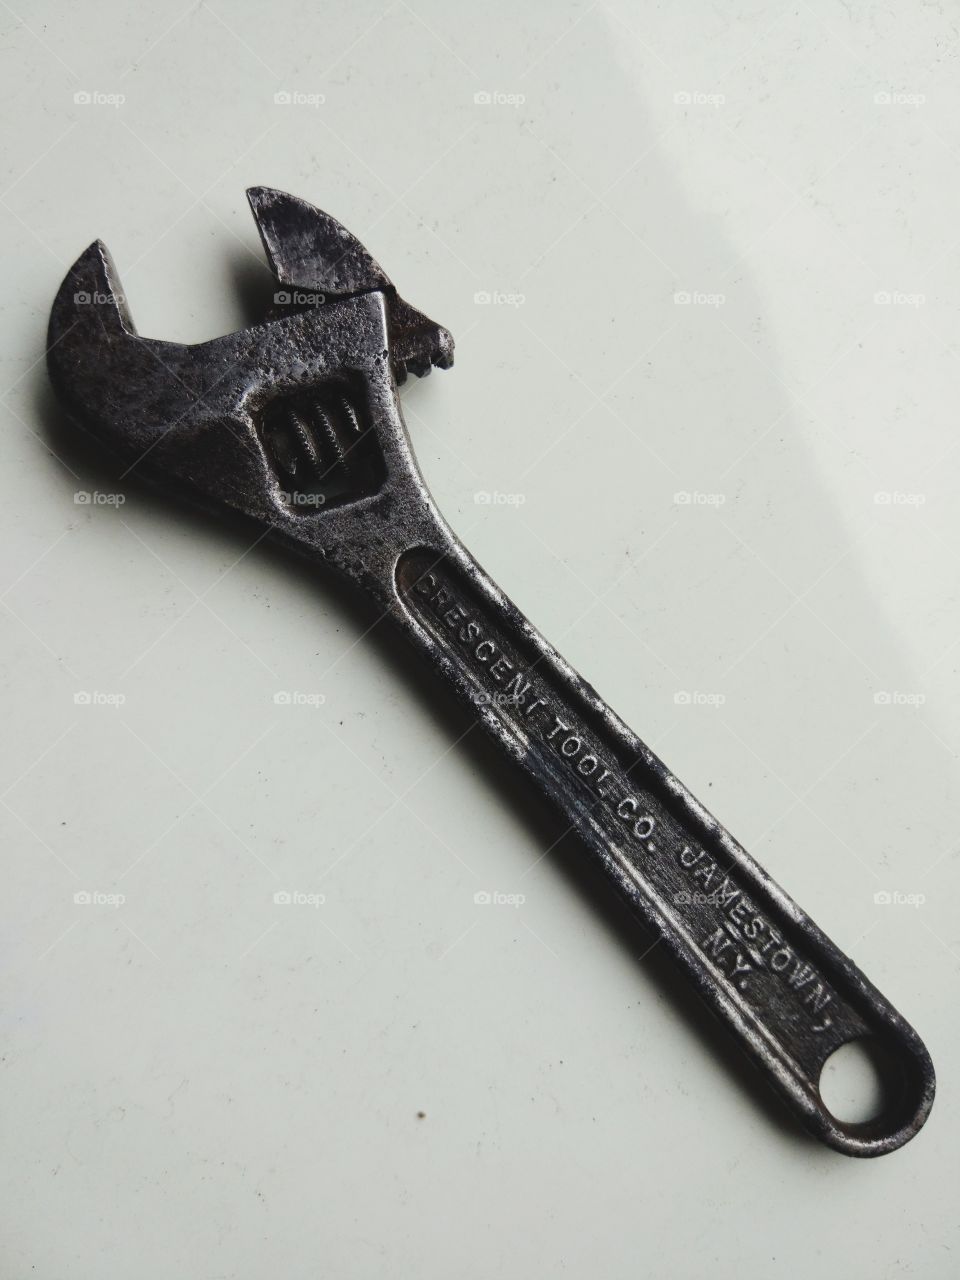 Old small American wrench